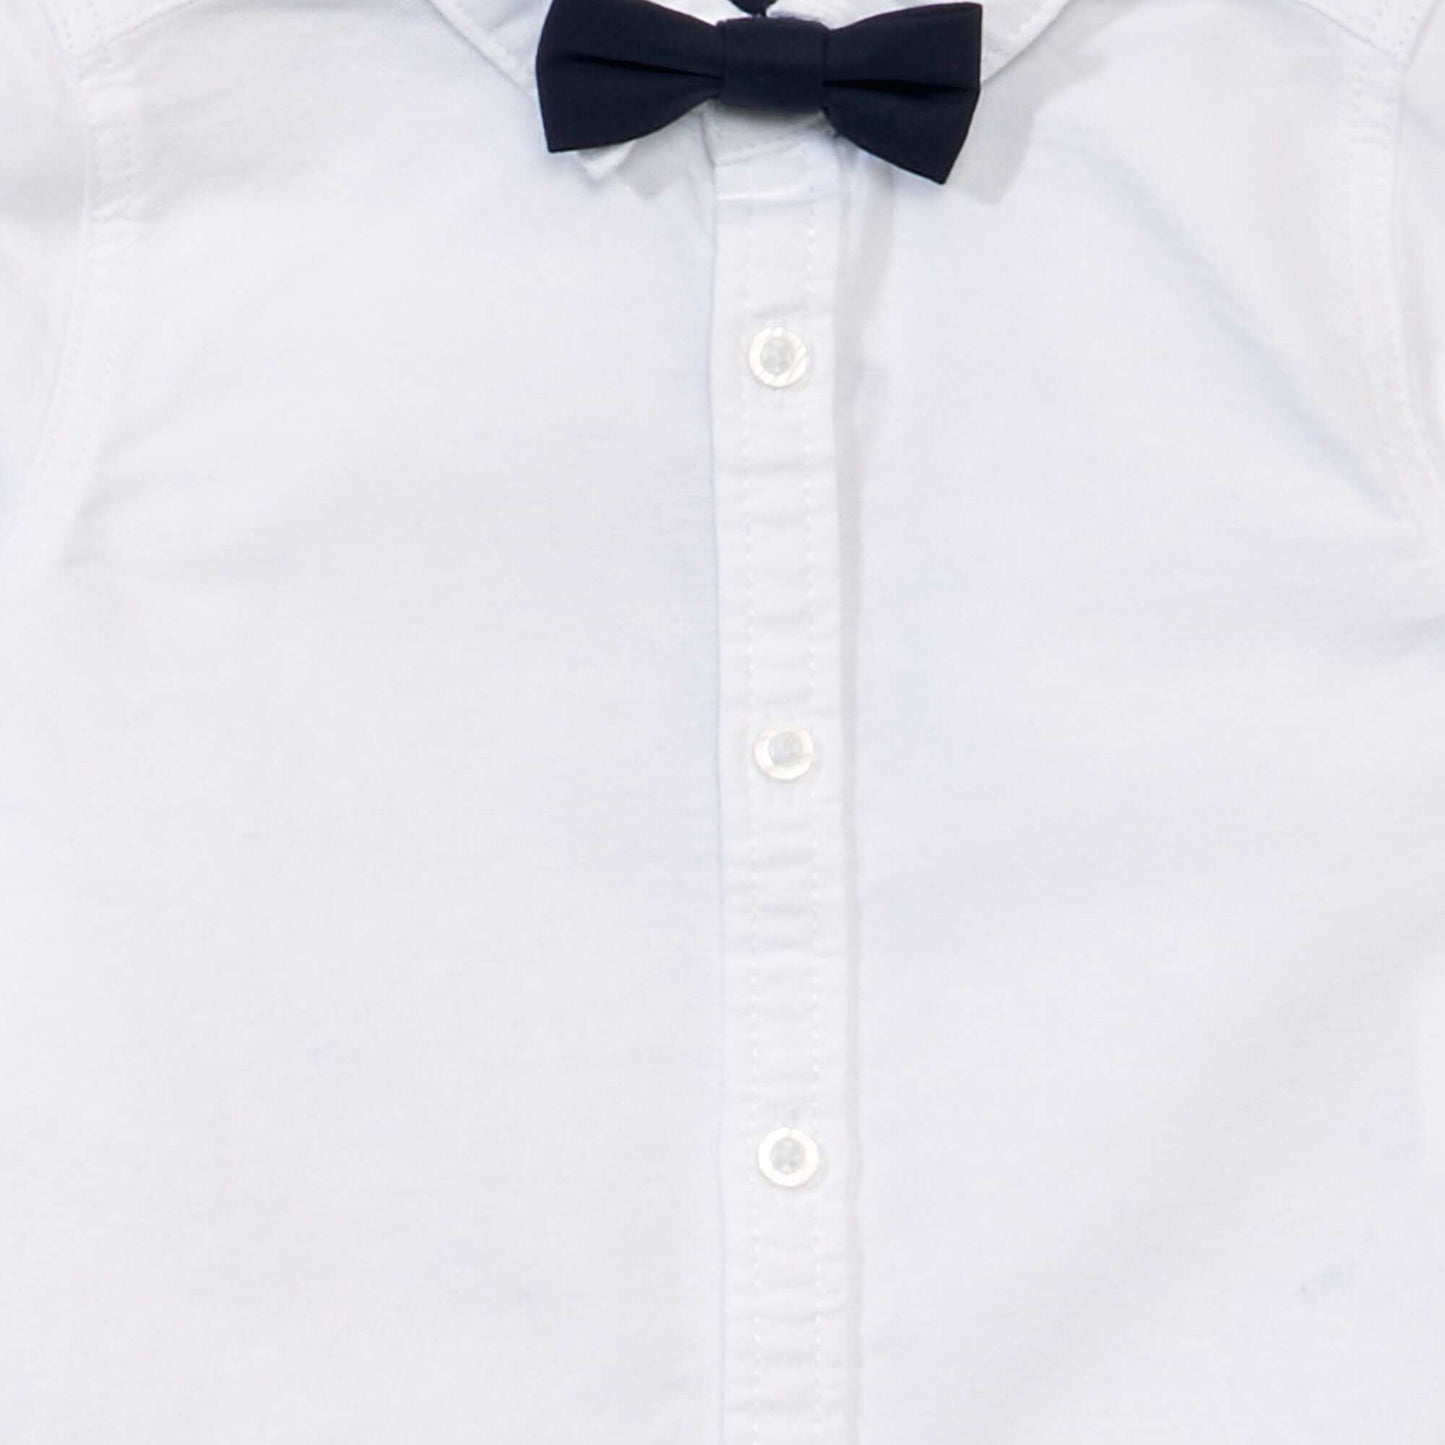 White shirt with removable bow tie white